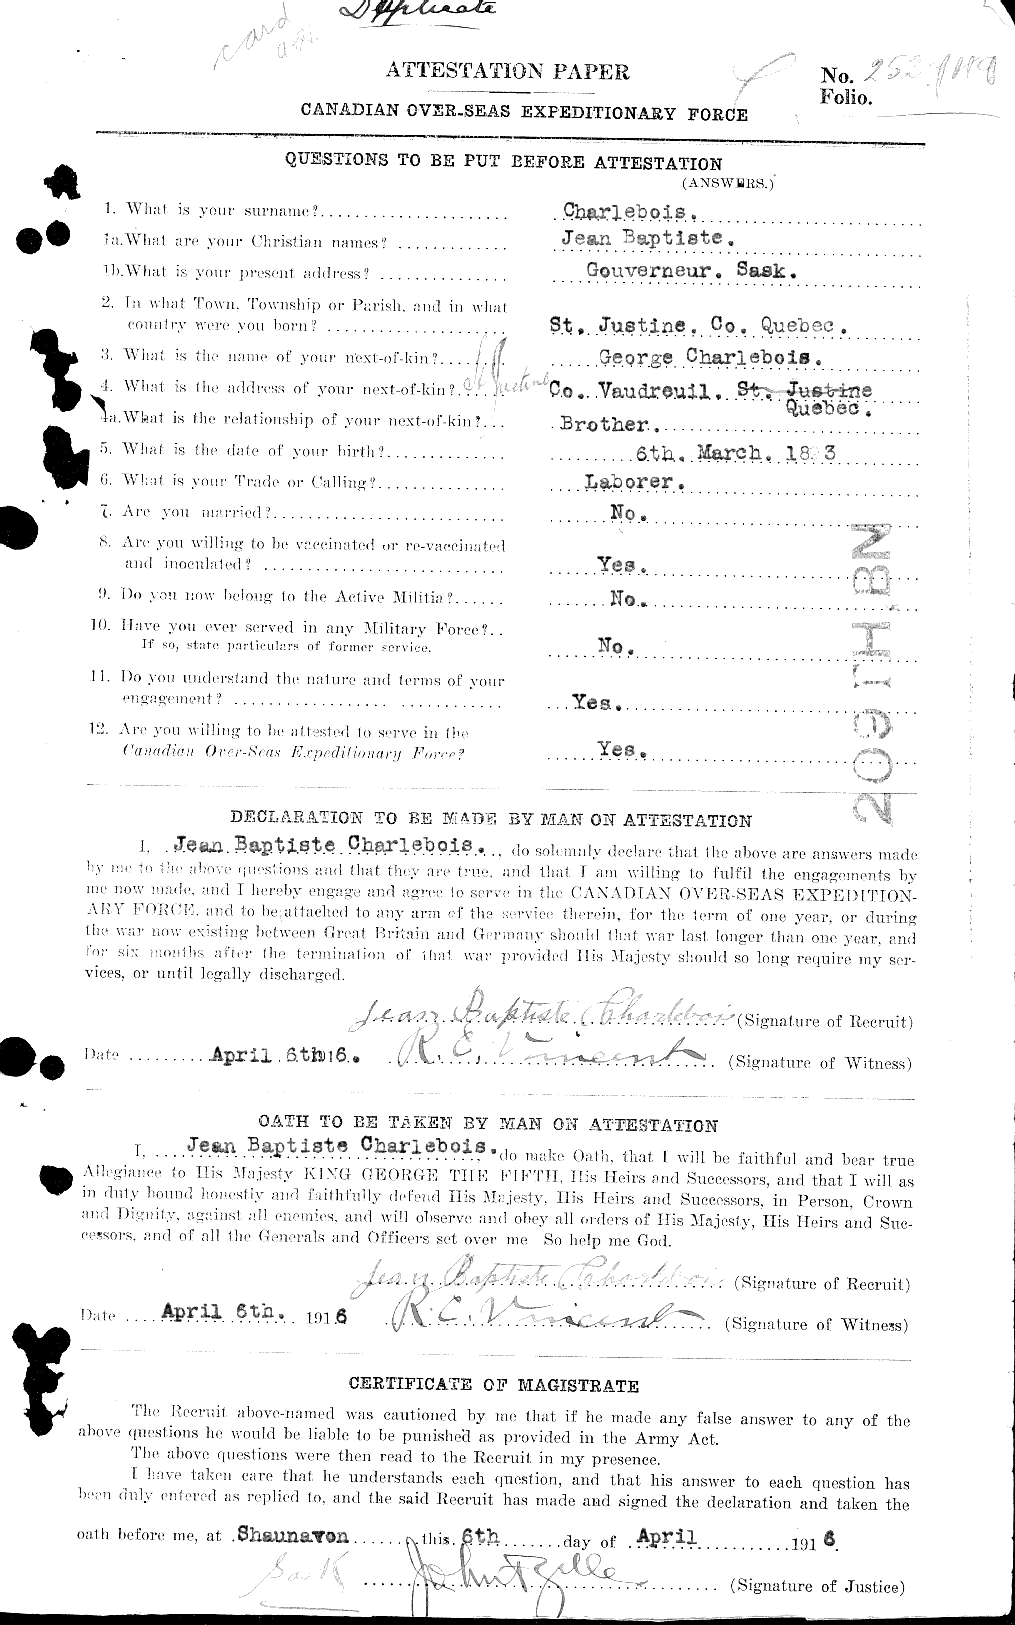 Personnel Records of the First World War - CEF 015619a